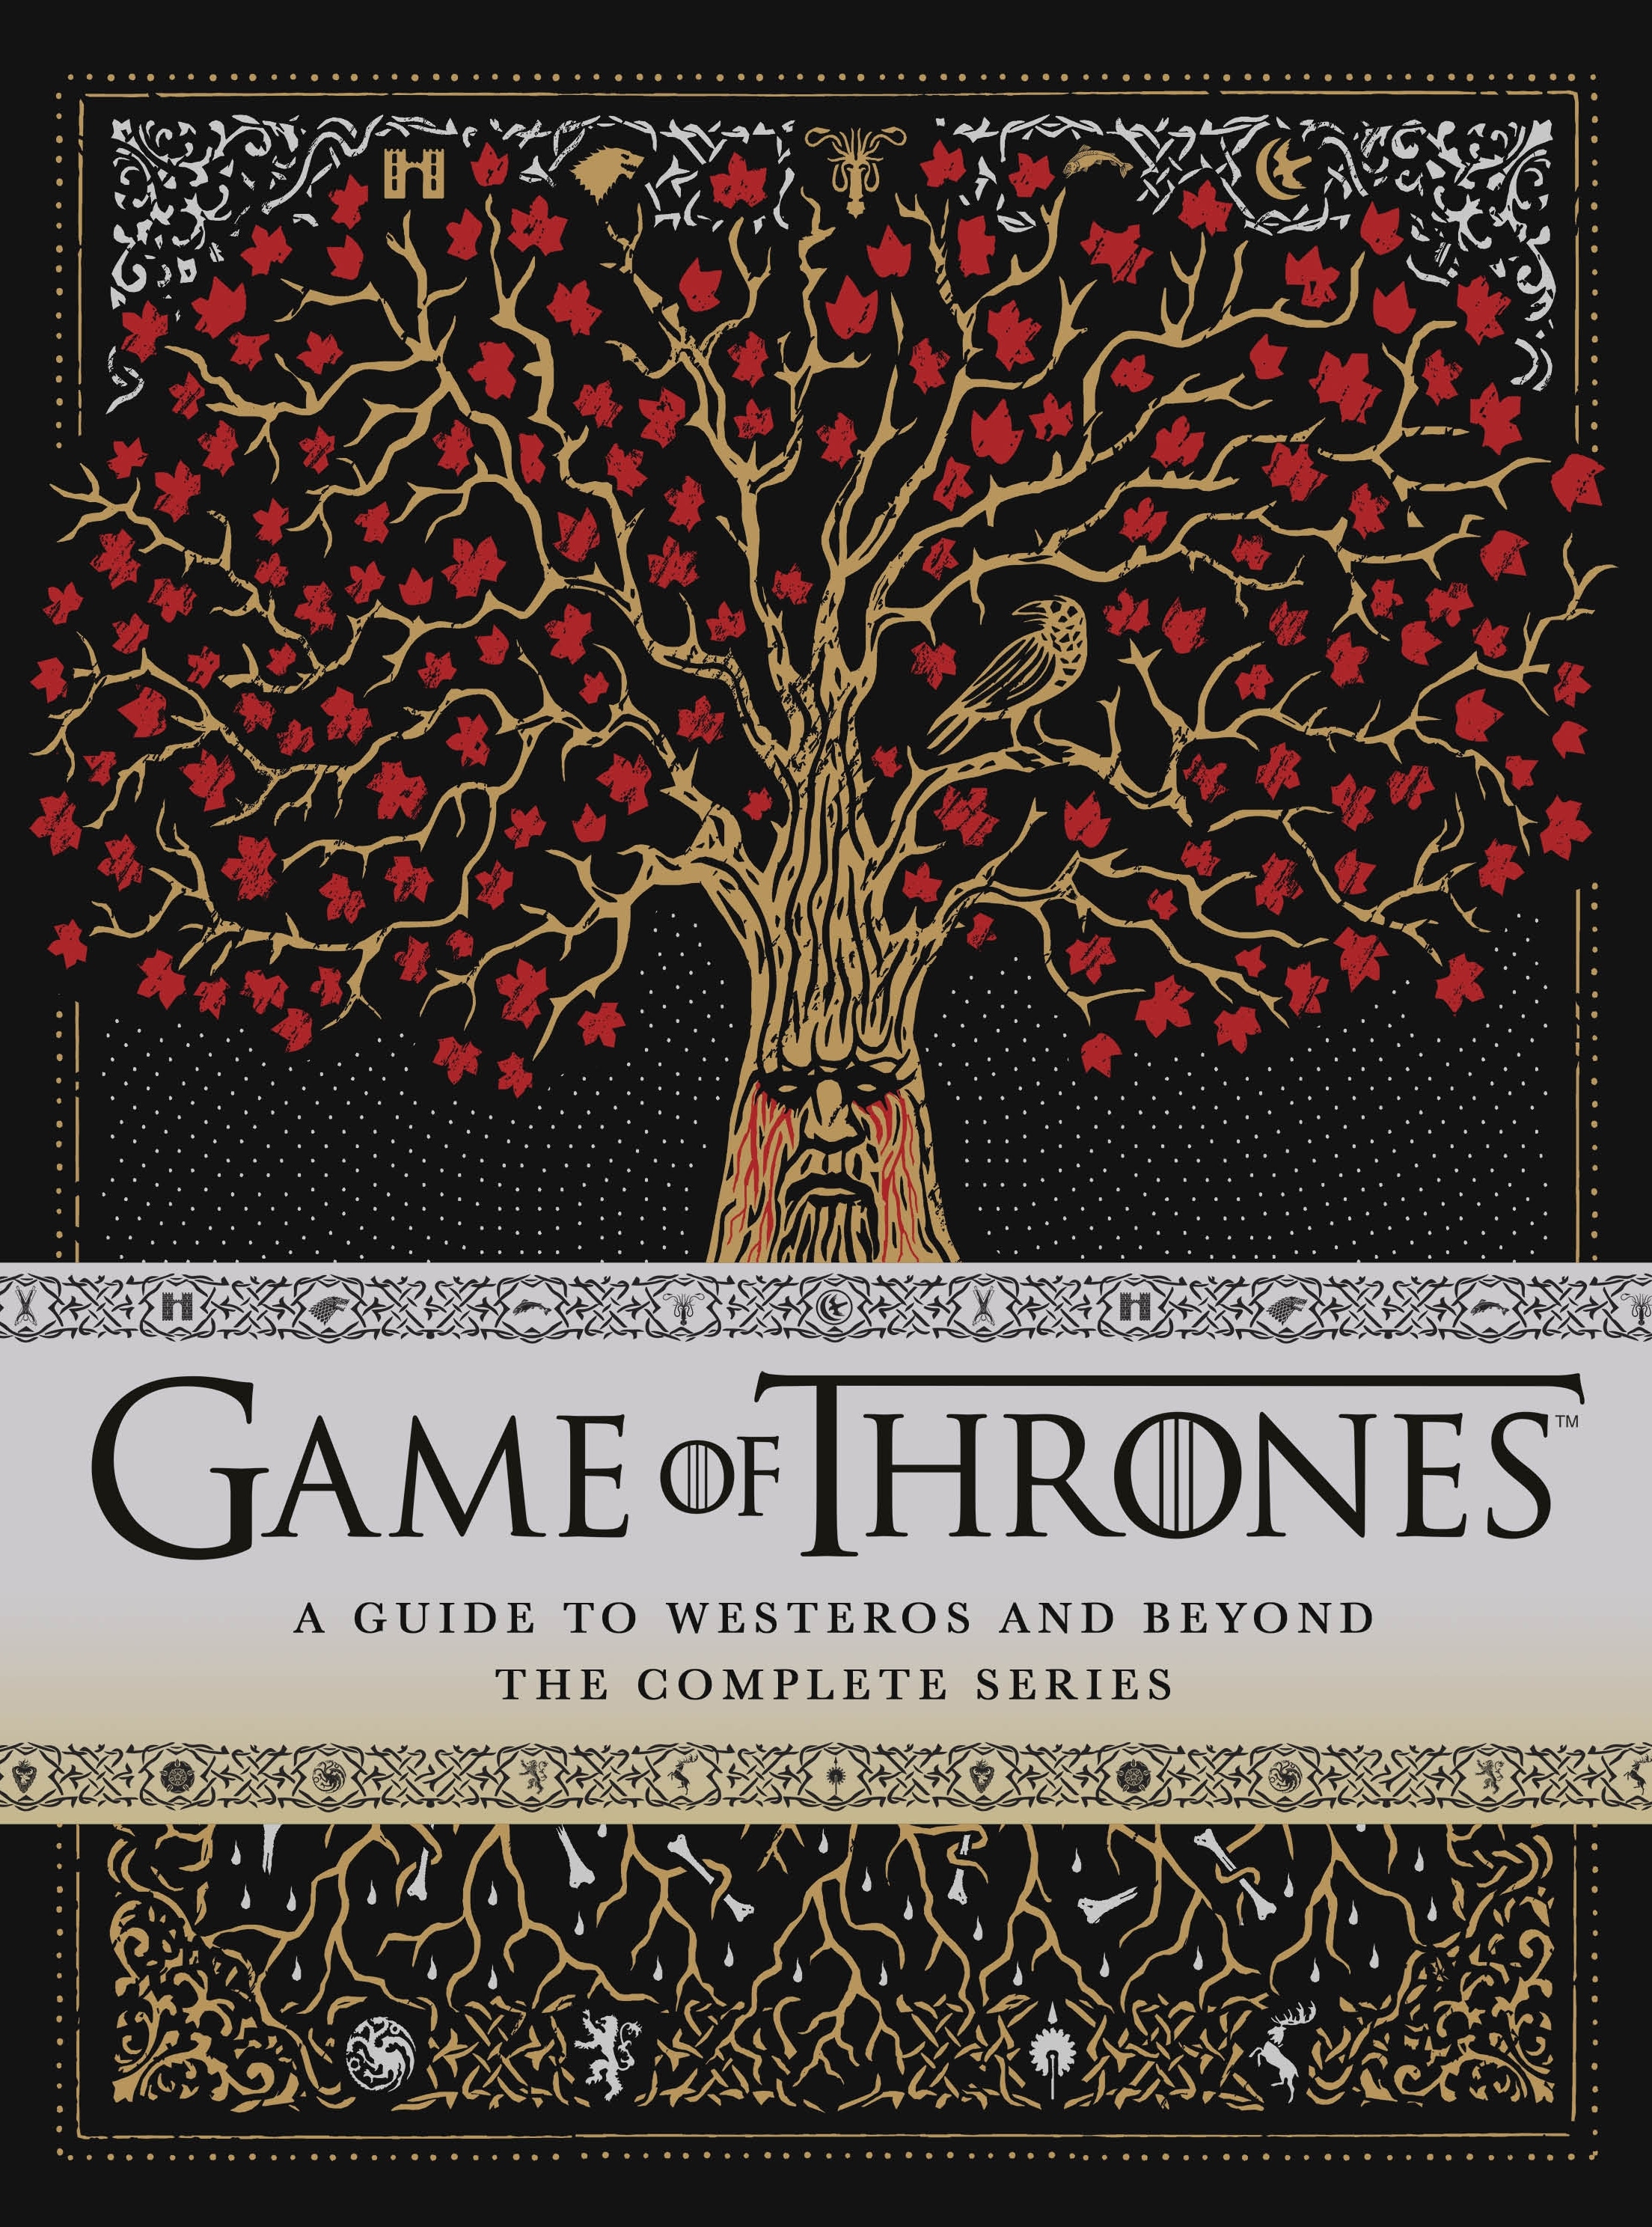 Book “Game of Thrones: A Guide to Westeros and Beyond” by Myles McNutt — October 31, 2019